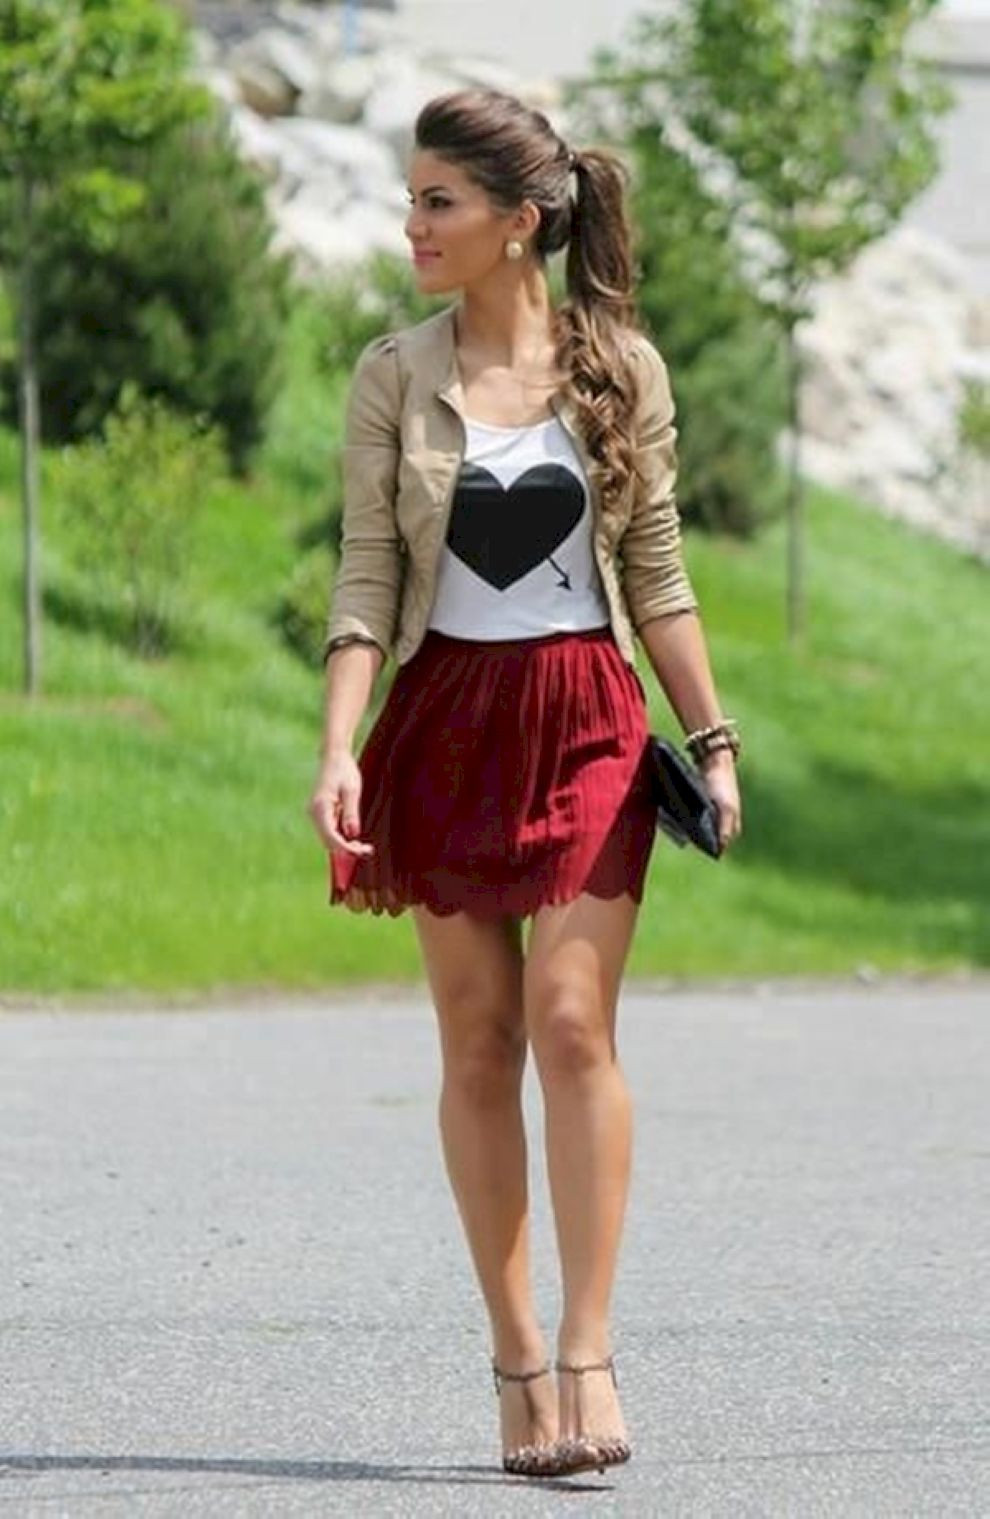 Valentines Day Outfit Ideas
 Cute Valentines Day Outfit Ideas That Teens Will